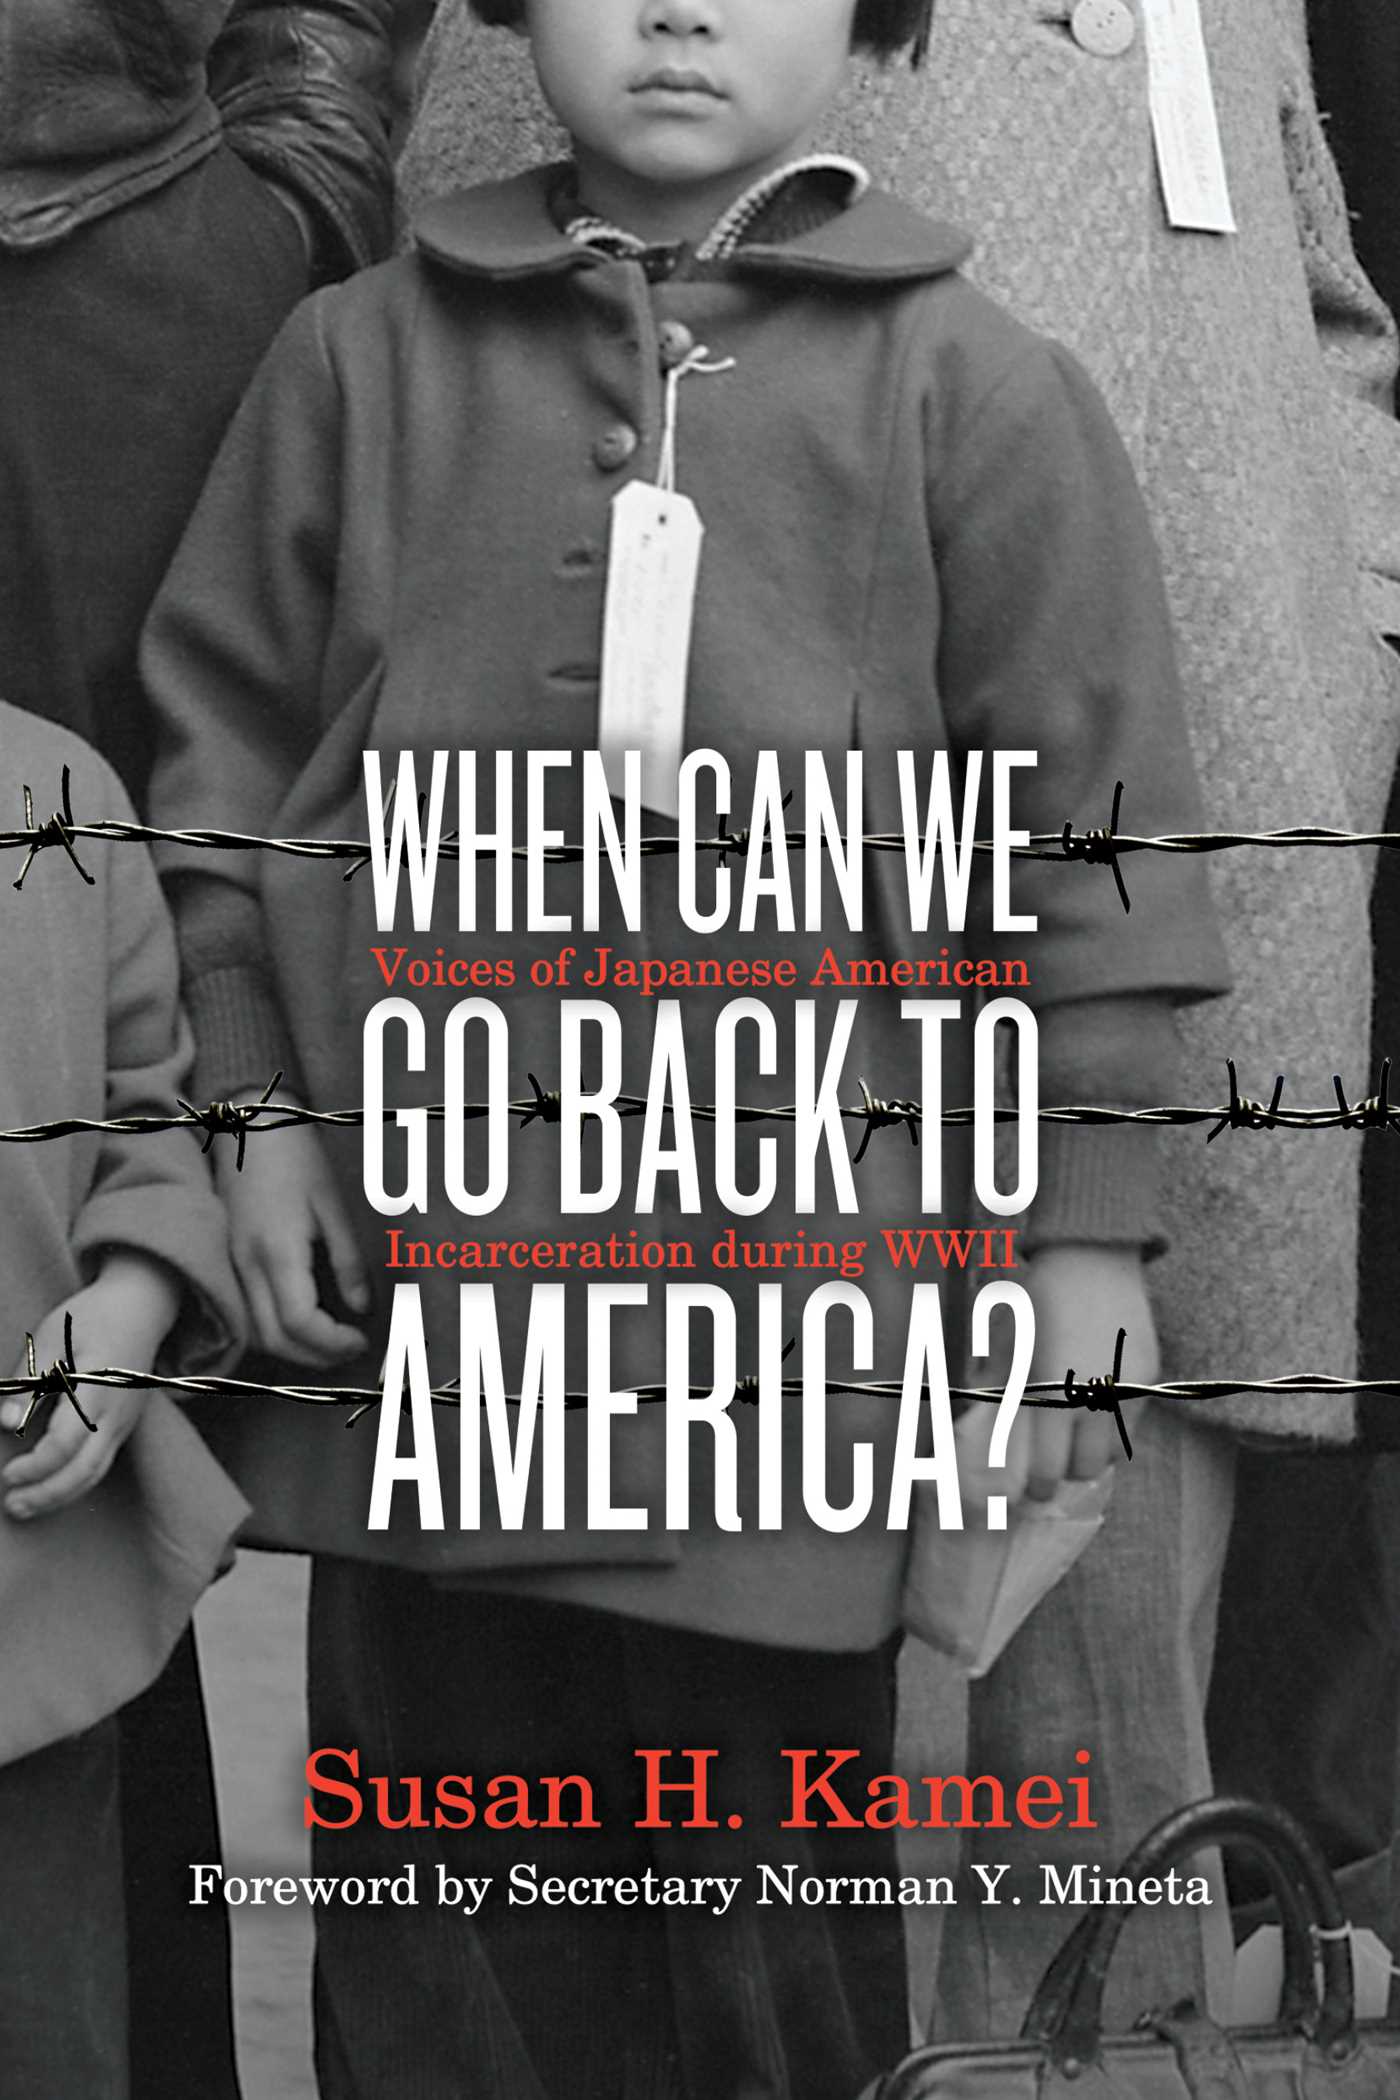 Cover Image for "When can we go back to america?"